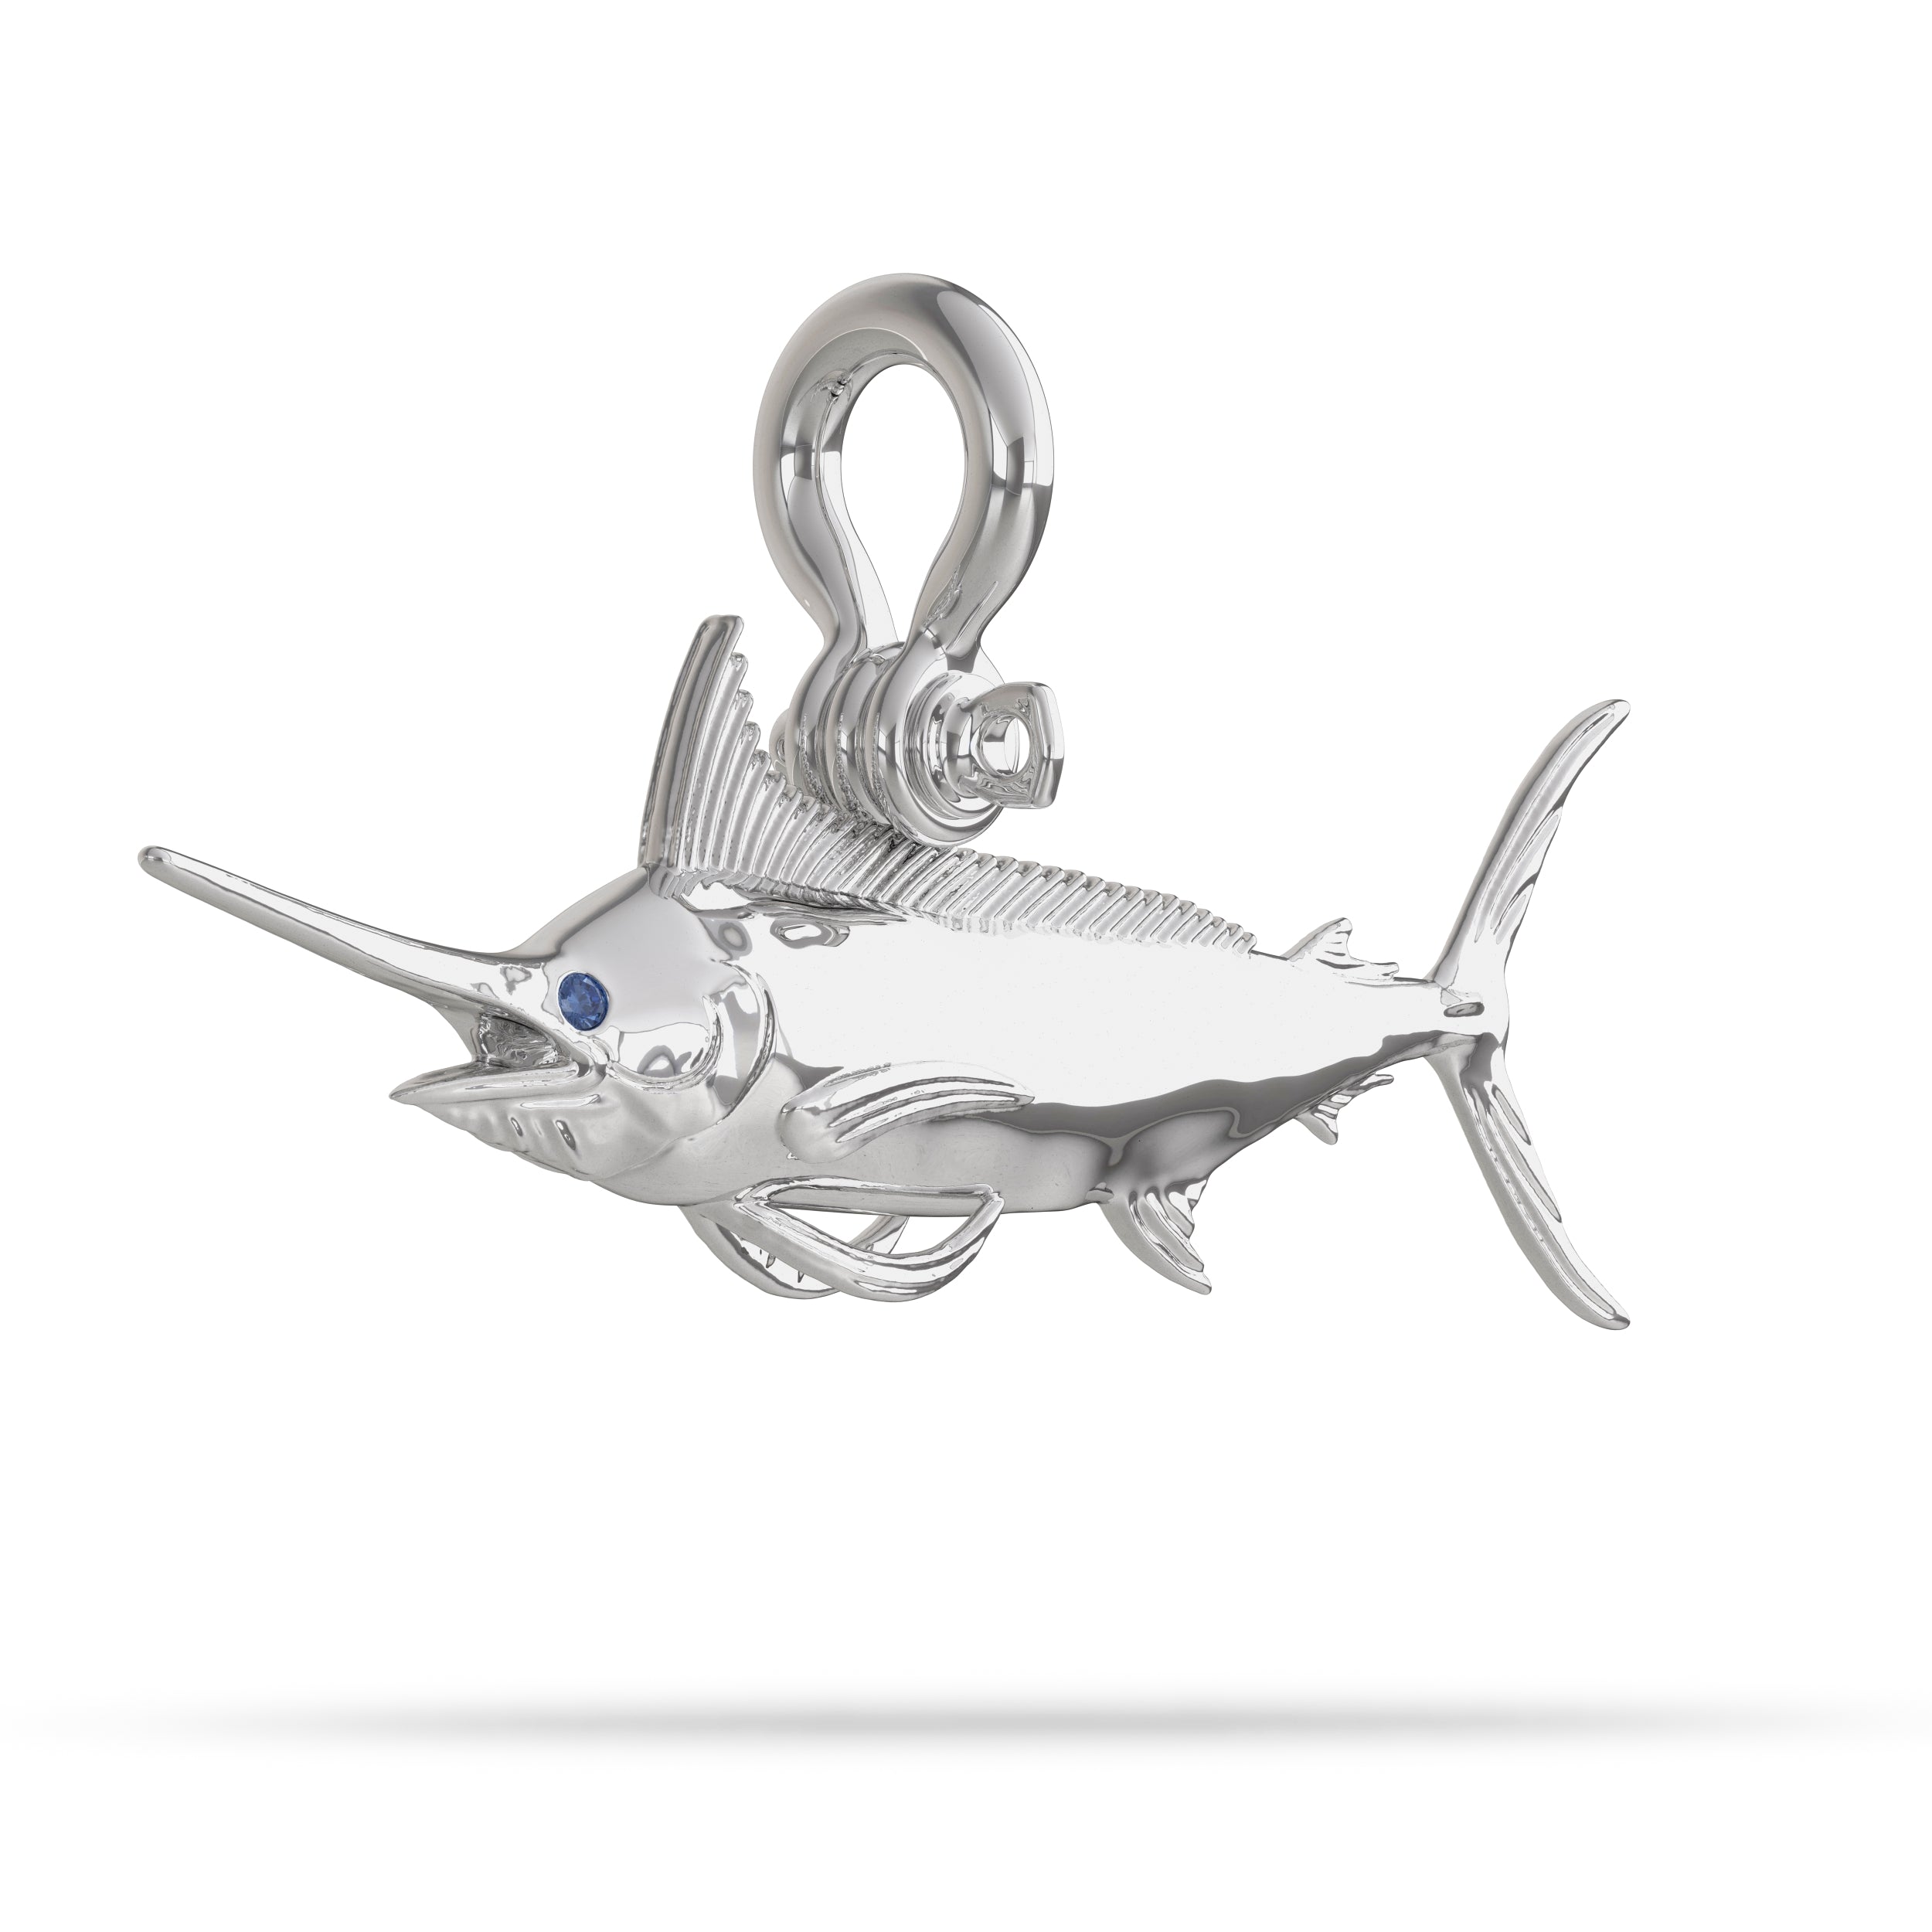 Sterling Silver Blue Marlin Jewelry Pendant High Polished Mirror Finish With Blue Sapphire Eye with A Mariner Shackle Bail Custom Designed By Nautical Treasure Jewelry In The Florida Keys Open From Hemingway Book Old Man and the Sea